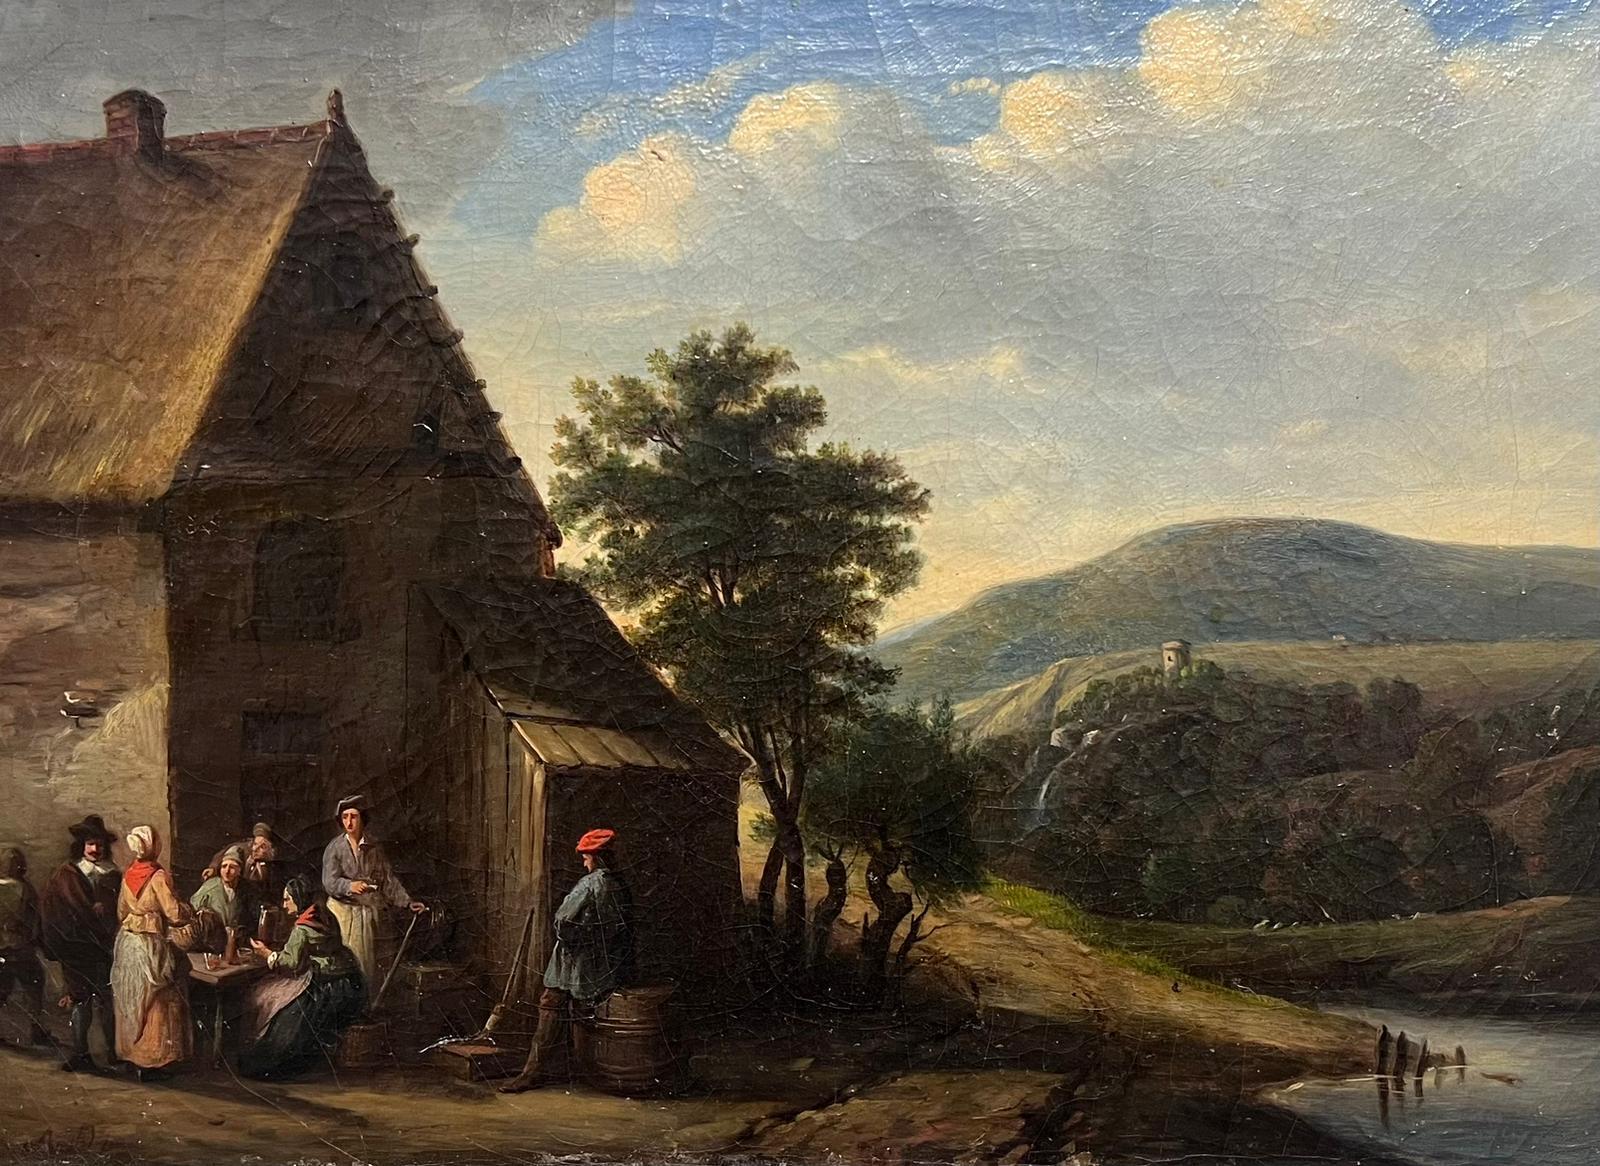 19th century Dutch or Flemish school Landscape Painting - Figures Chatting outside Village Tavern in Mountain Landscape, Period Oil 